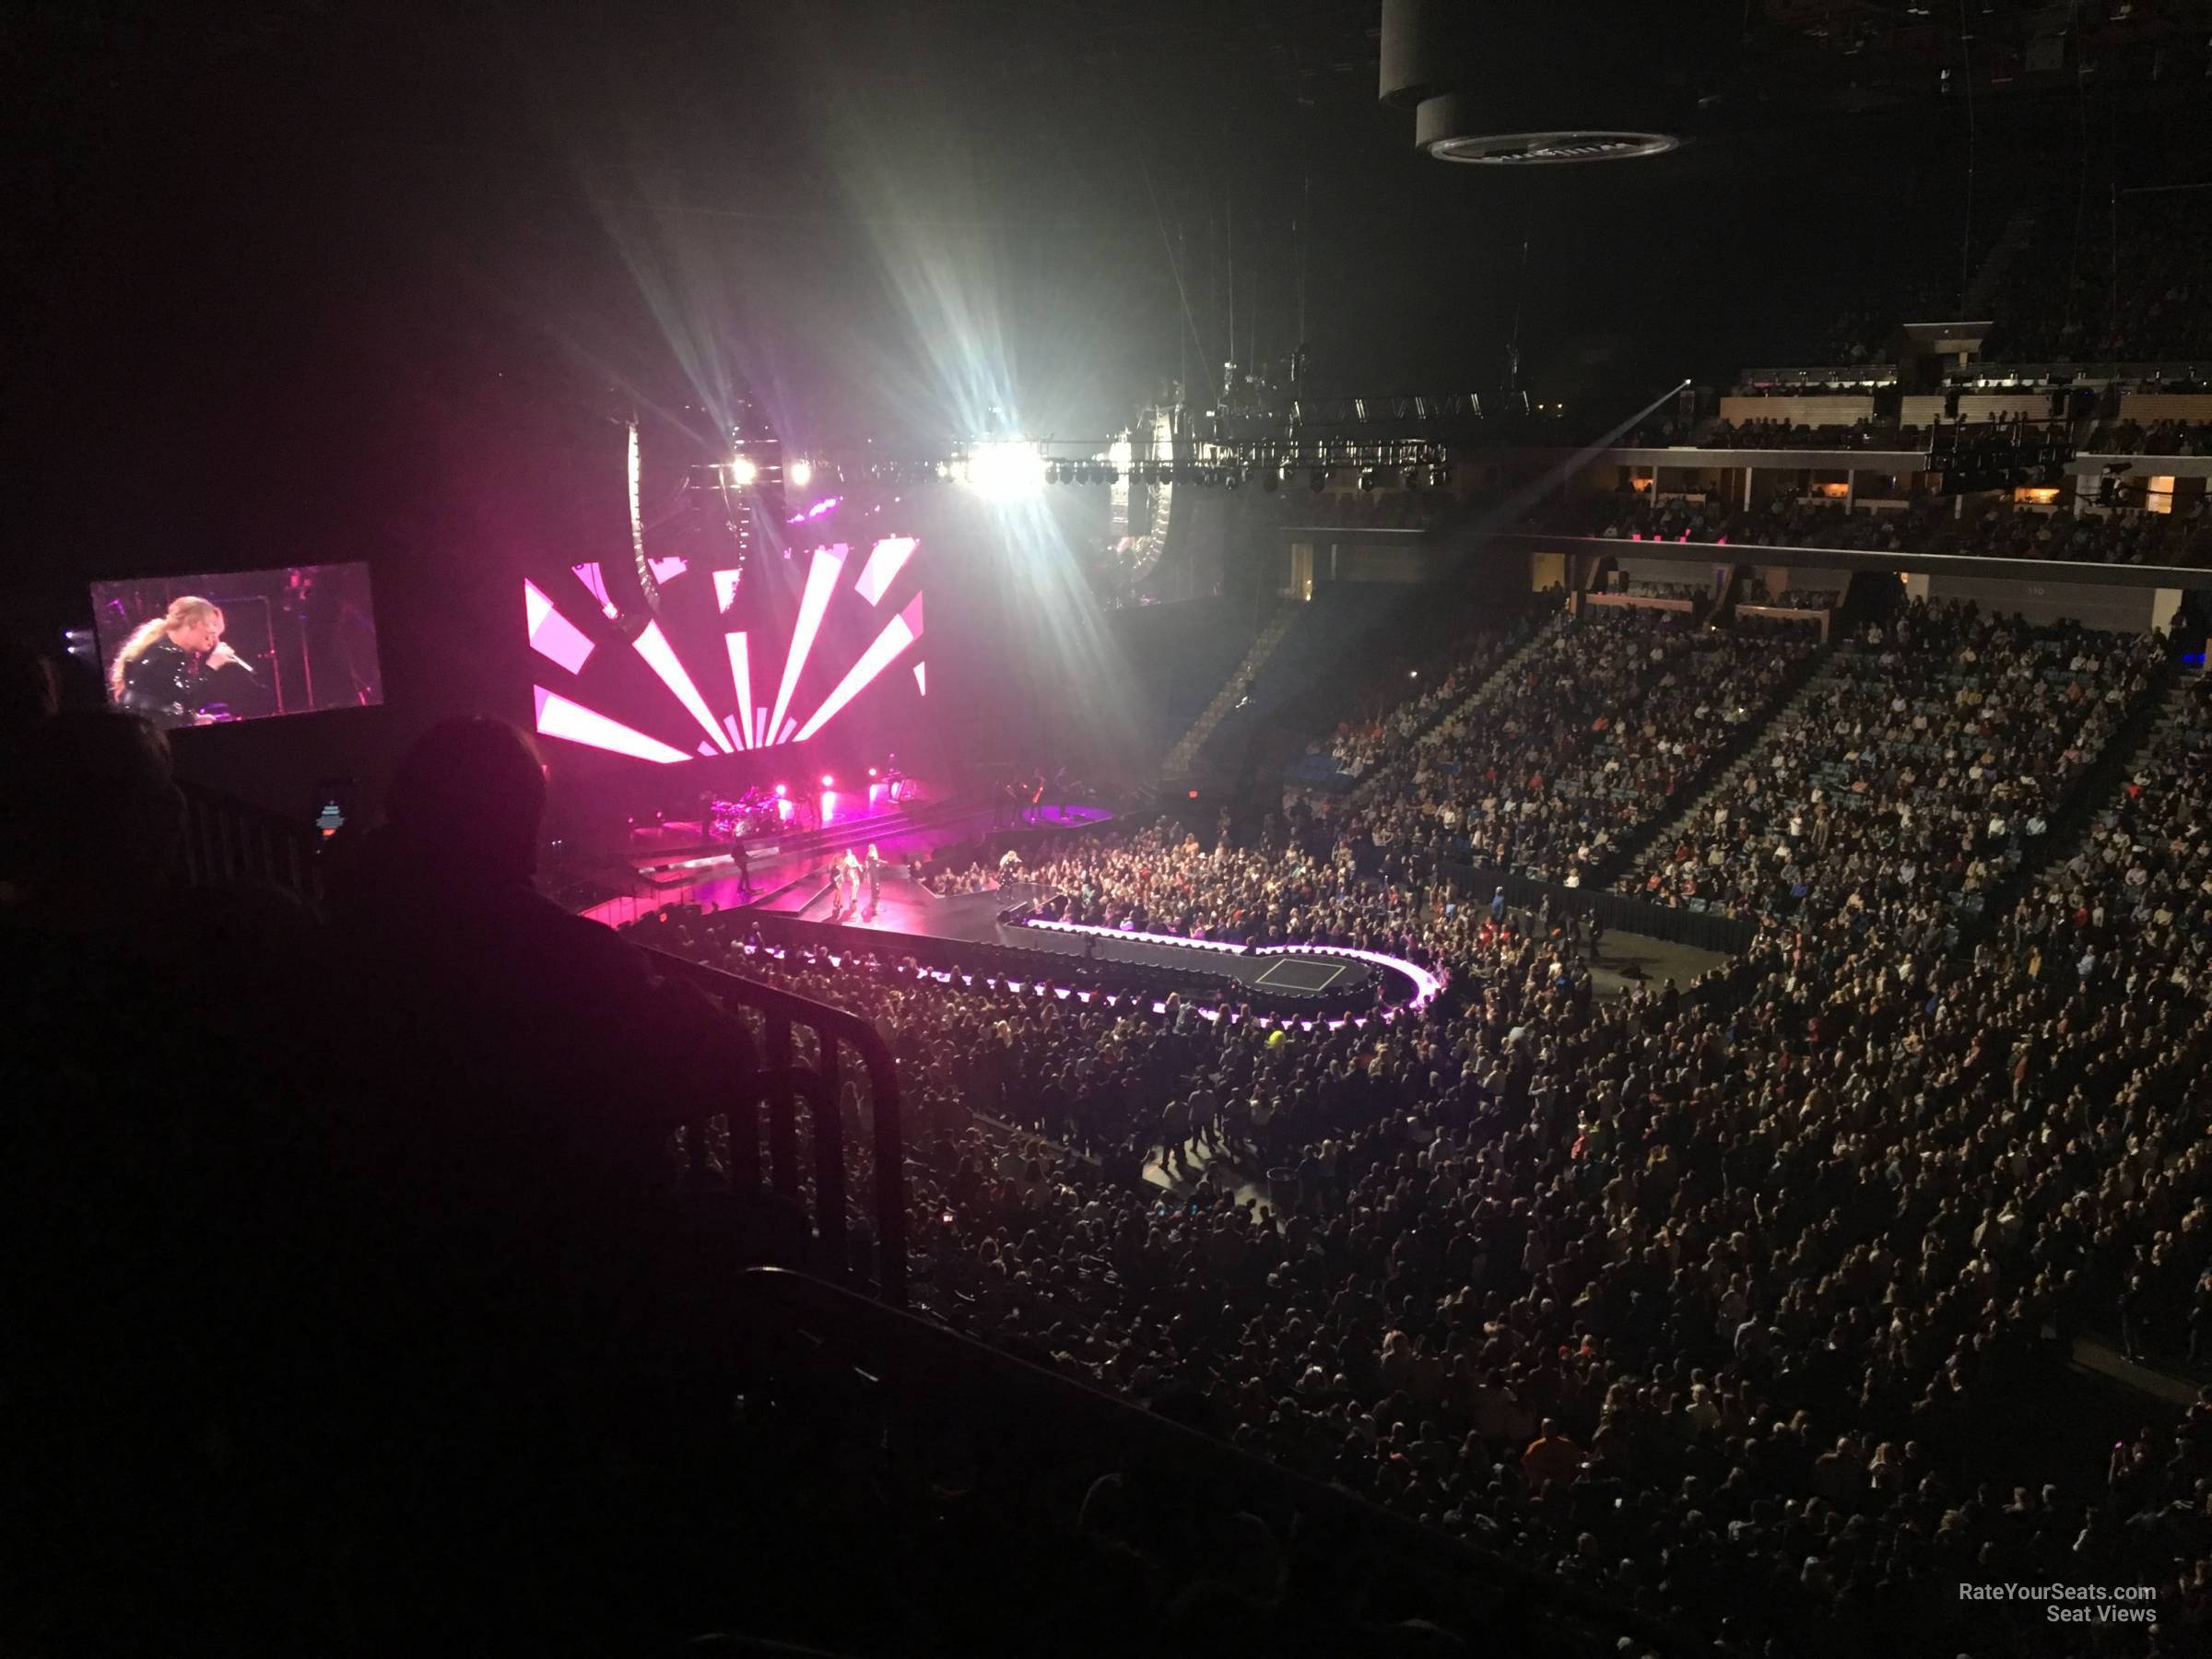 Section 328 at BOK Center for Concerts - RateYourSeats.com